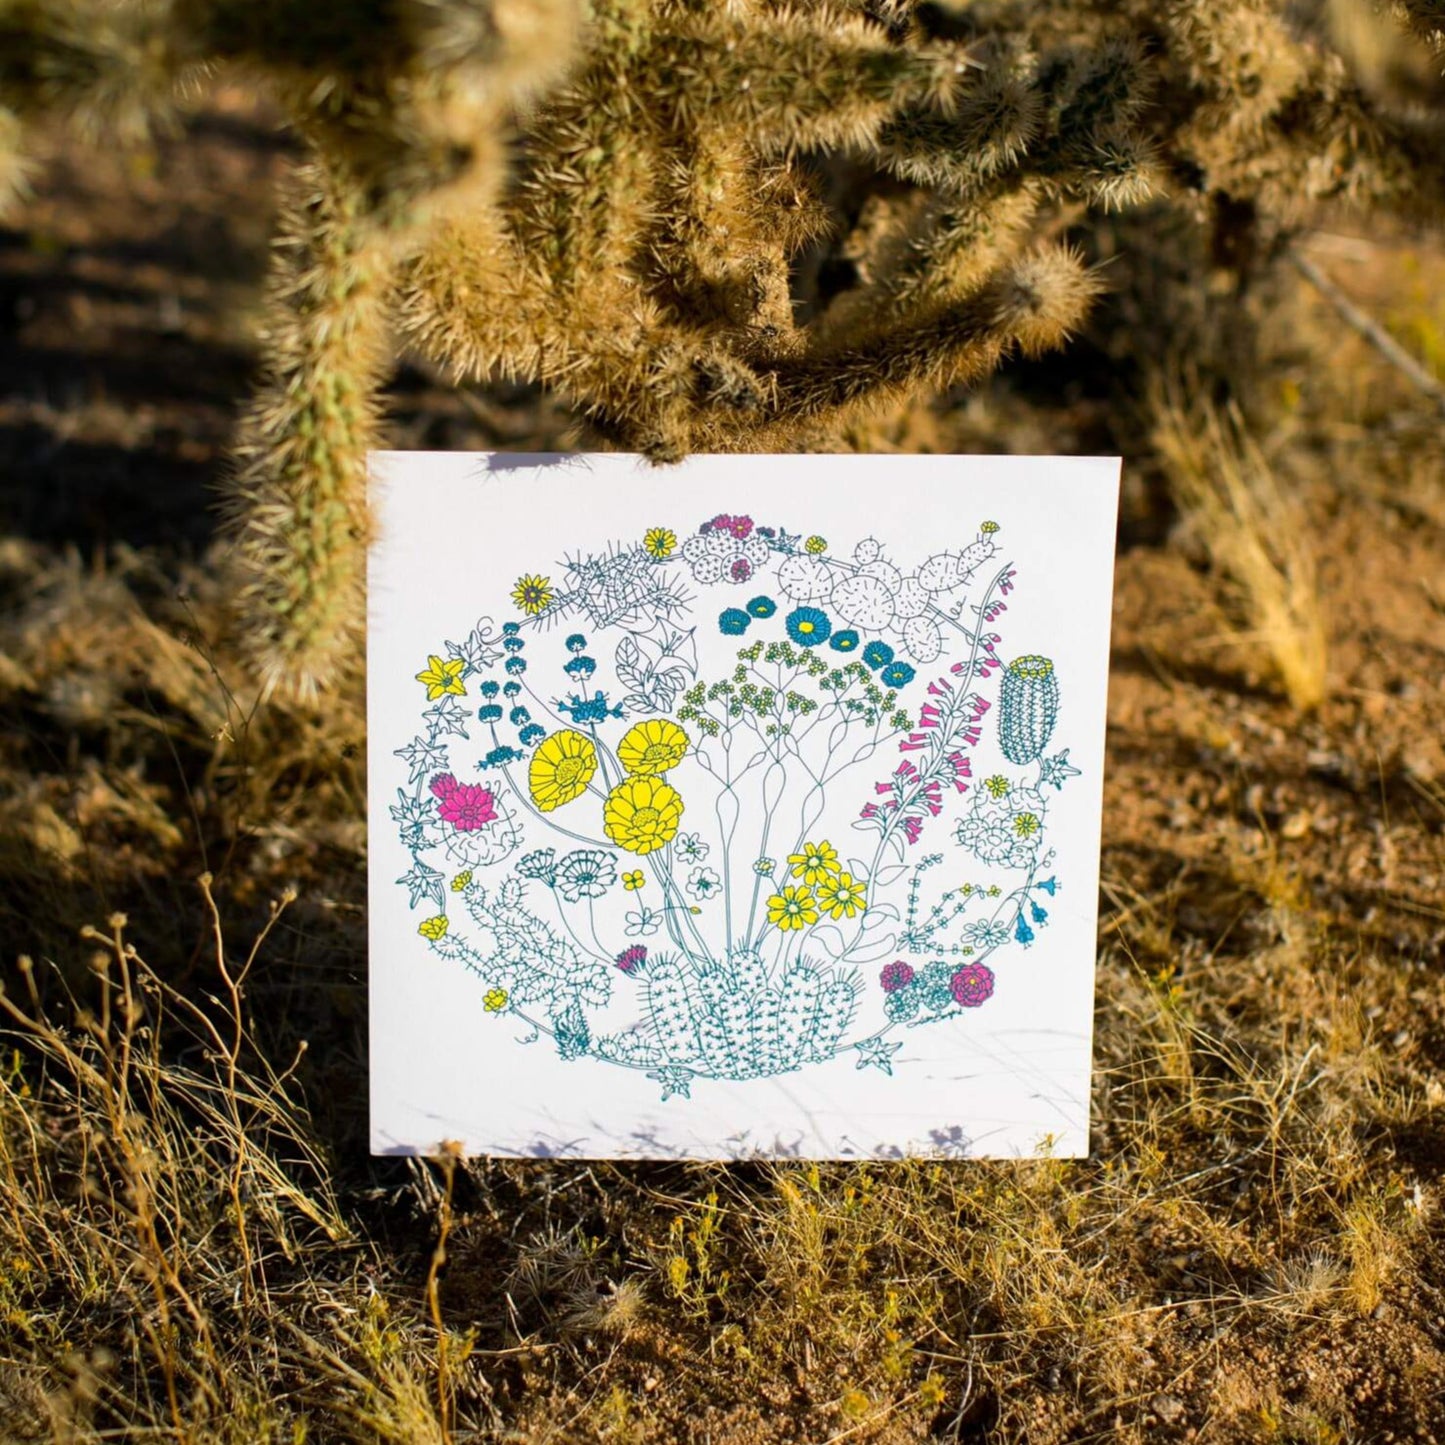 An illustration of flowers on plants that can be found in the Mojave Desert and/or Joshua Tree National Park. The outlines of the plants are a dark green color. Some of the flowers are colored a bright yellow, some a bright pink, and some a bright blue. The composition is in a circular shape, and the illustration rests against a cholla cactus.